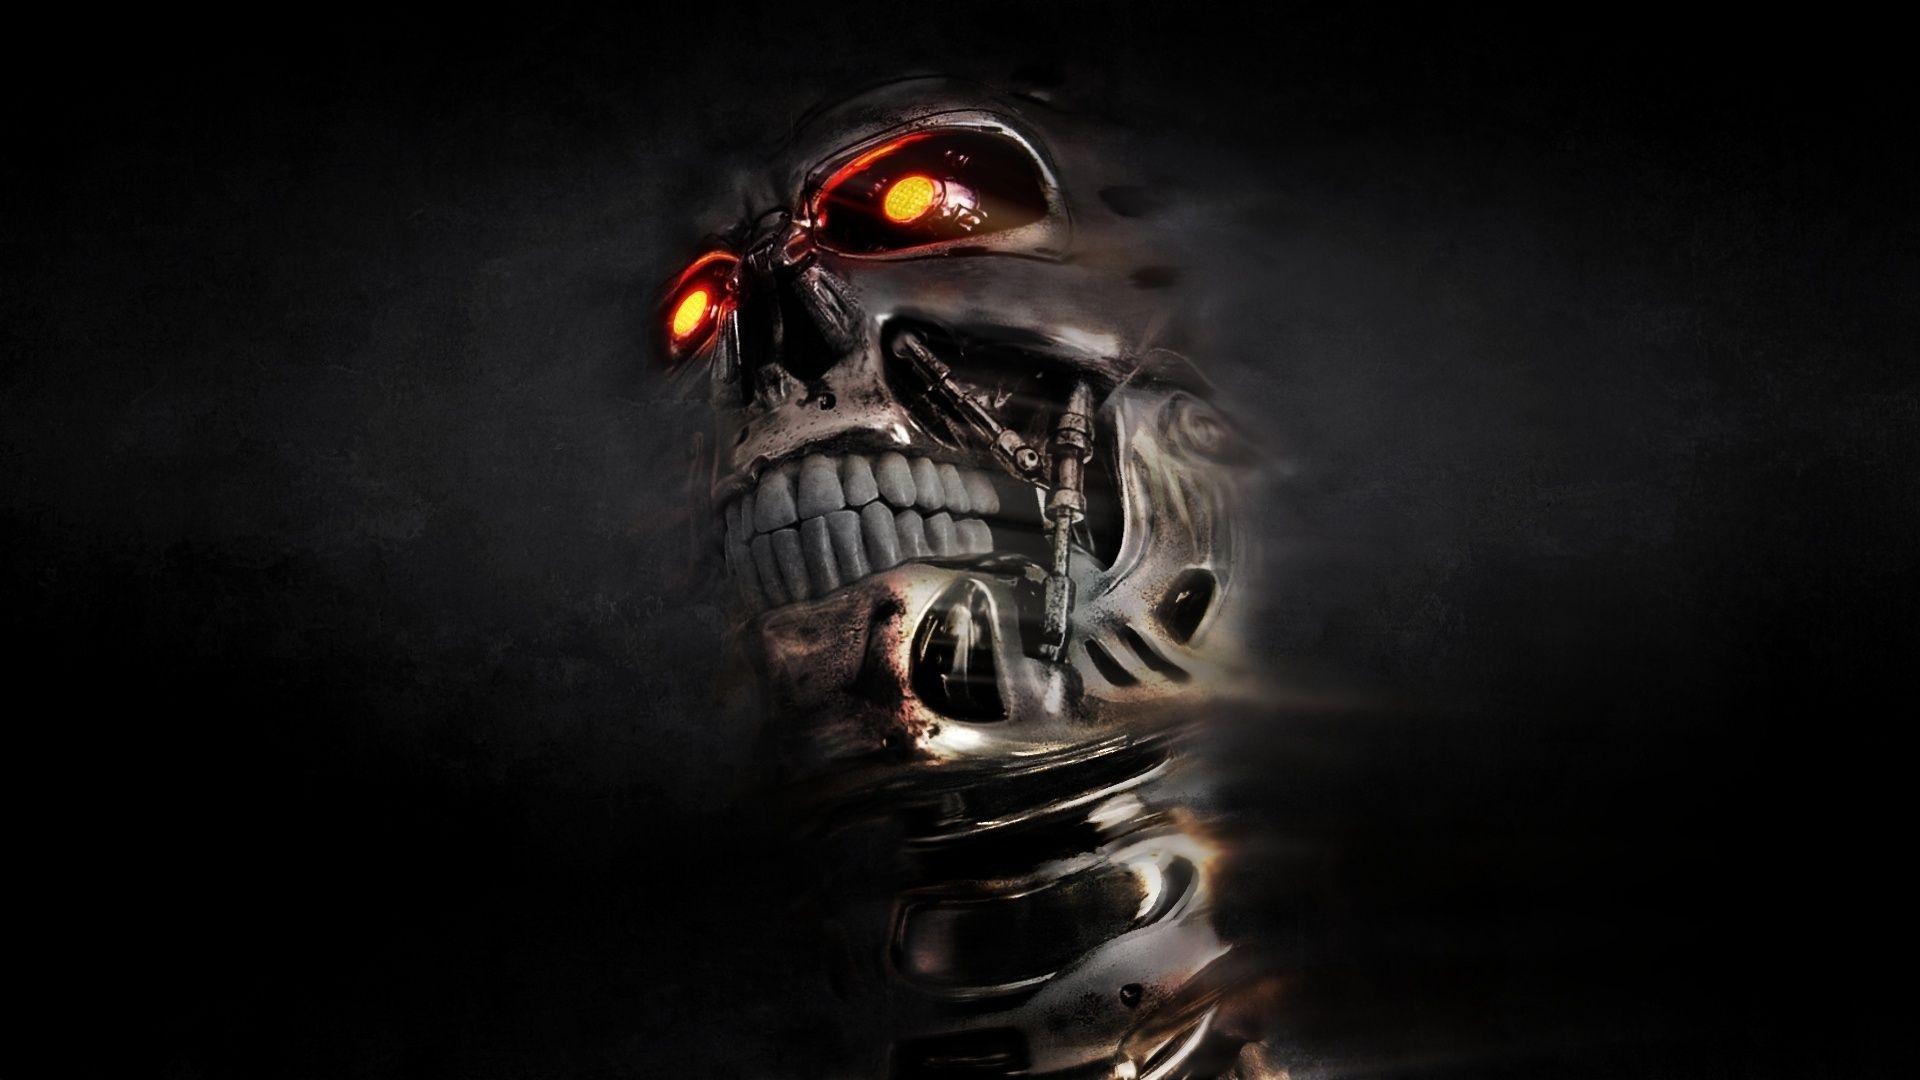 Animated Skull Wallpapers Top Free Animated Skull Backgrounds Wallpaperaccess